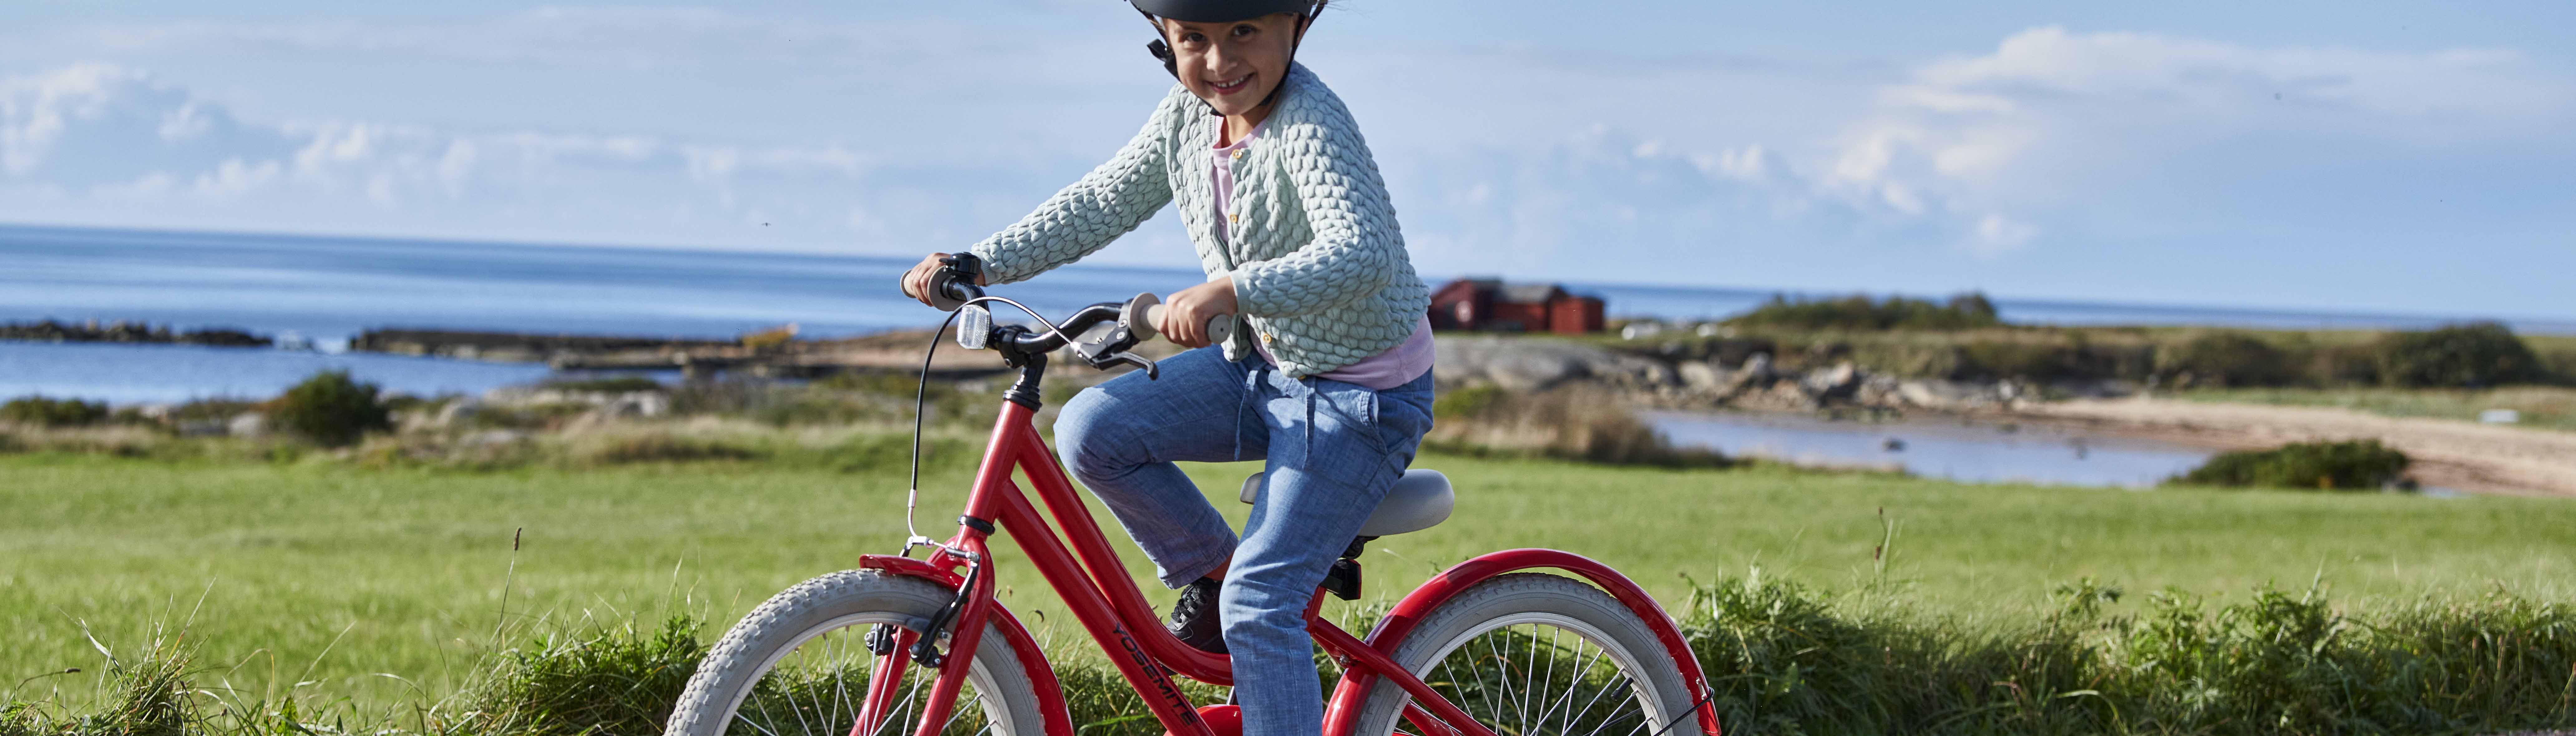 Children's bikes –for safe and fun cycling